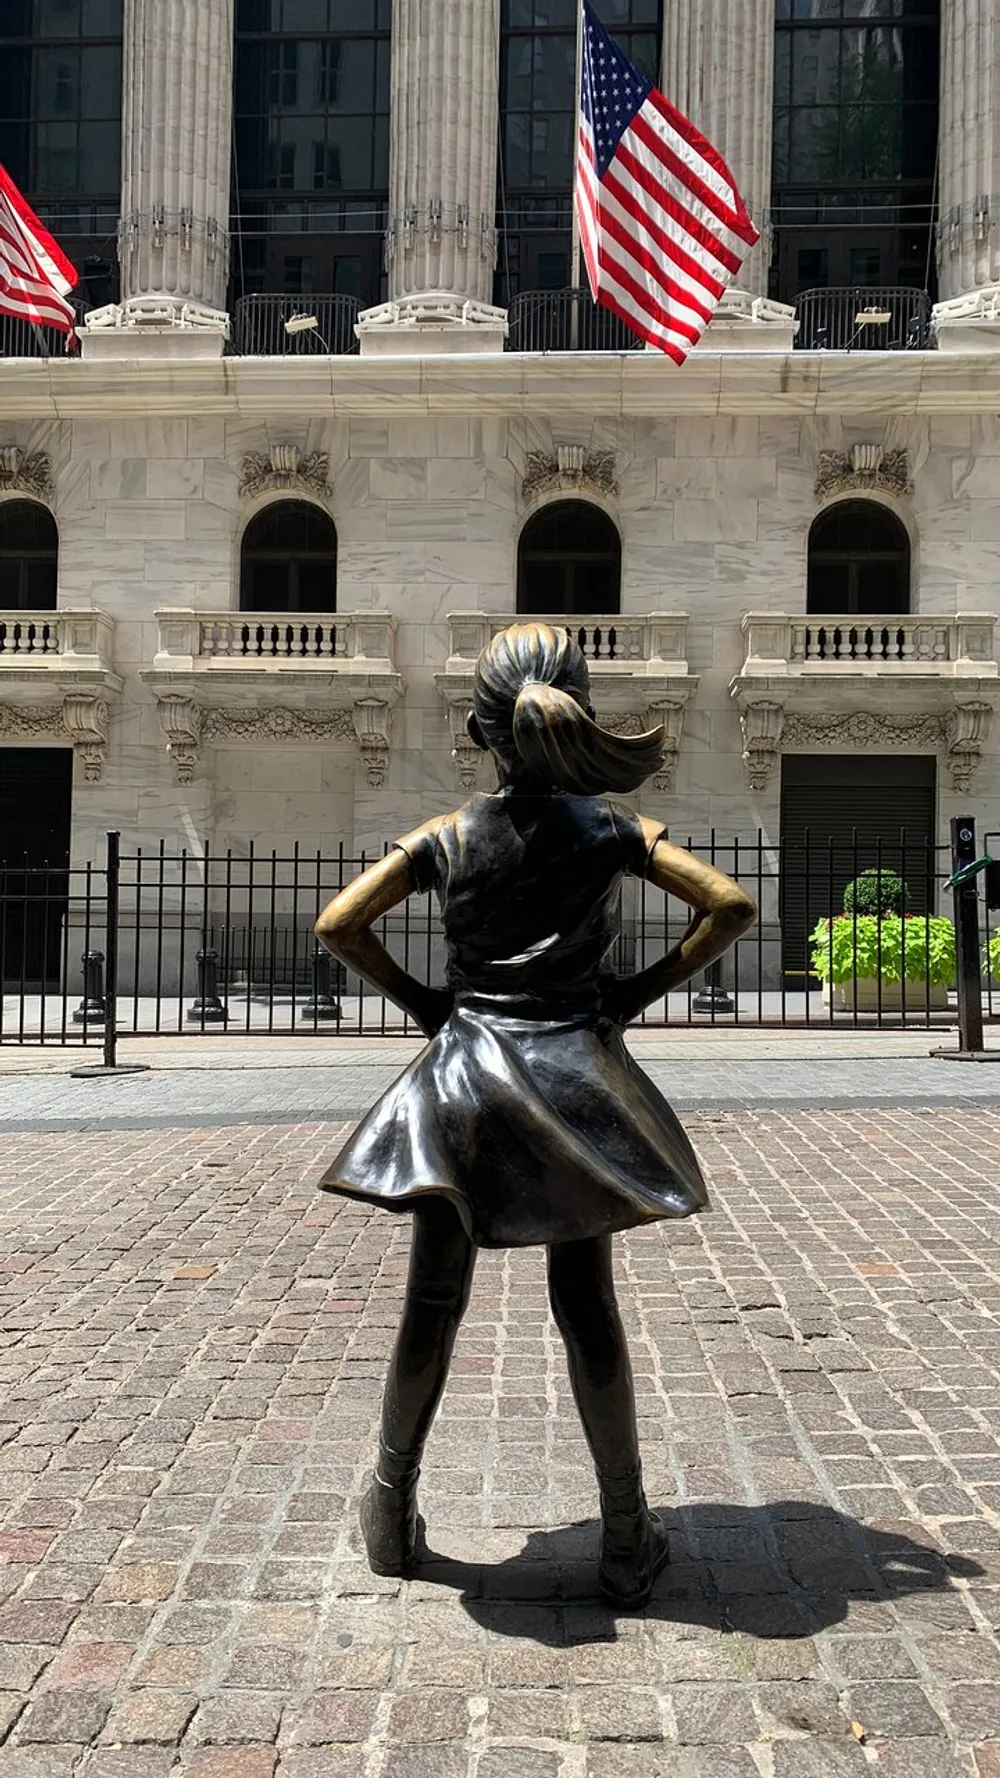 The image shows the Fearless Girl statue facing the New York Stock Exchange framed by two American flags